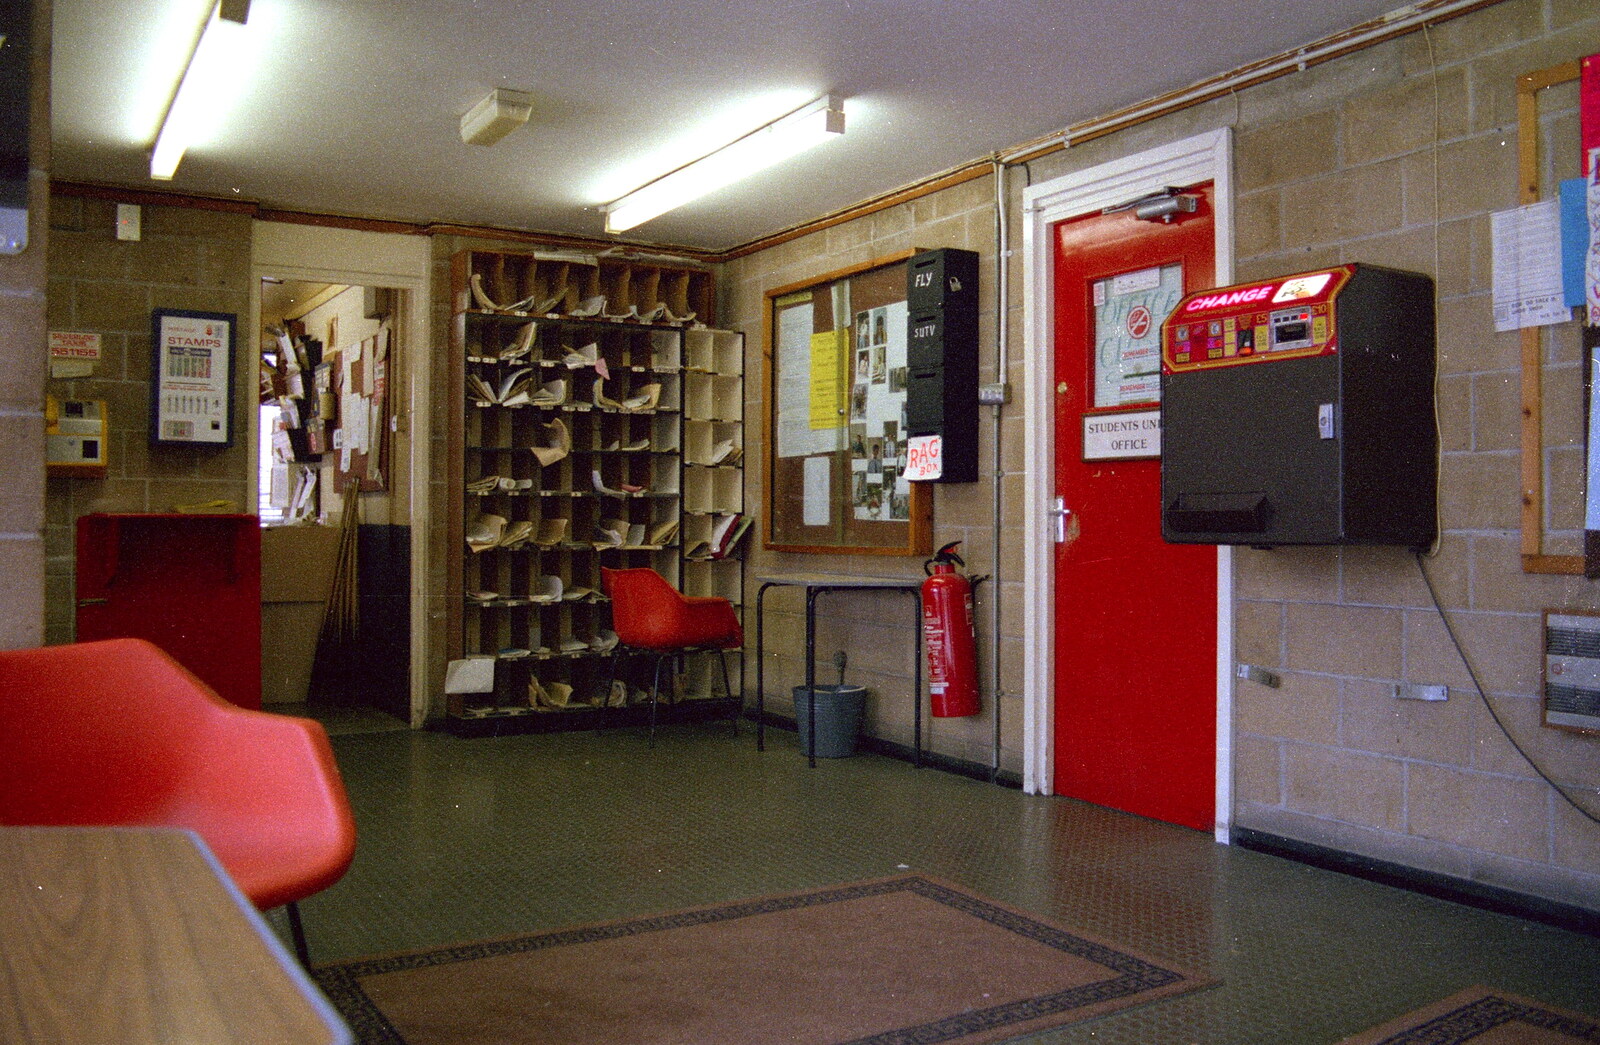 The SU entrance, with security and pigeonholes from Uni: Sport Aid - Run The World, Plymouth, Devon - 25th May 1986